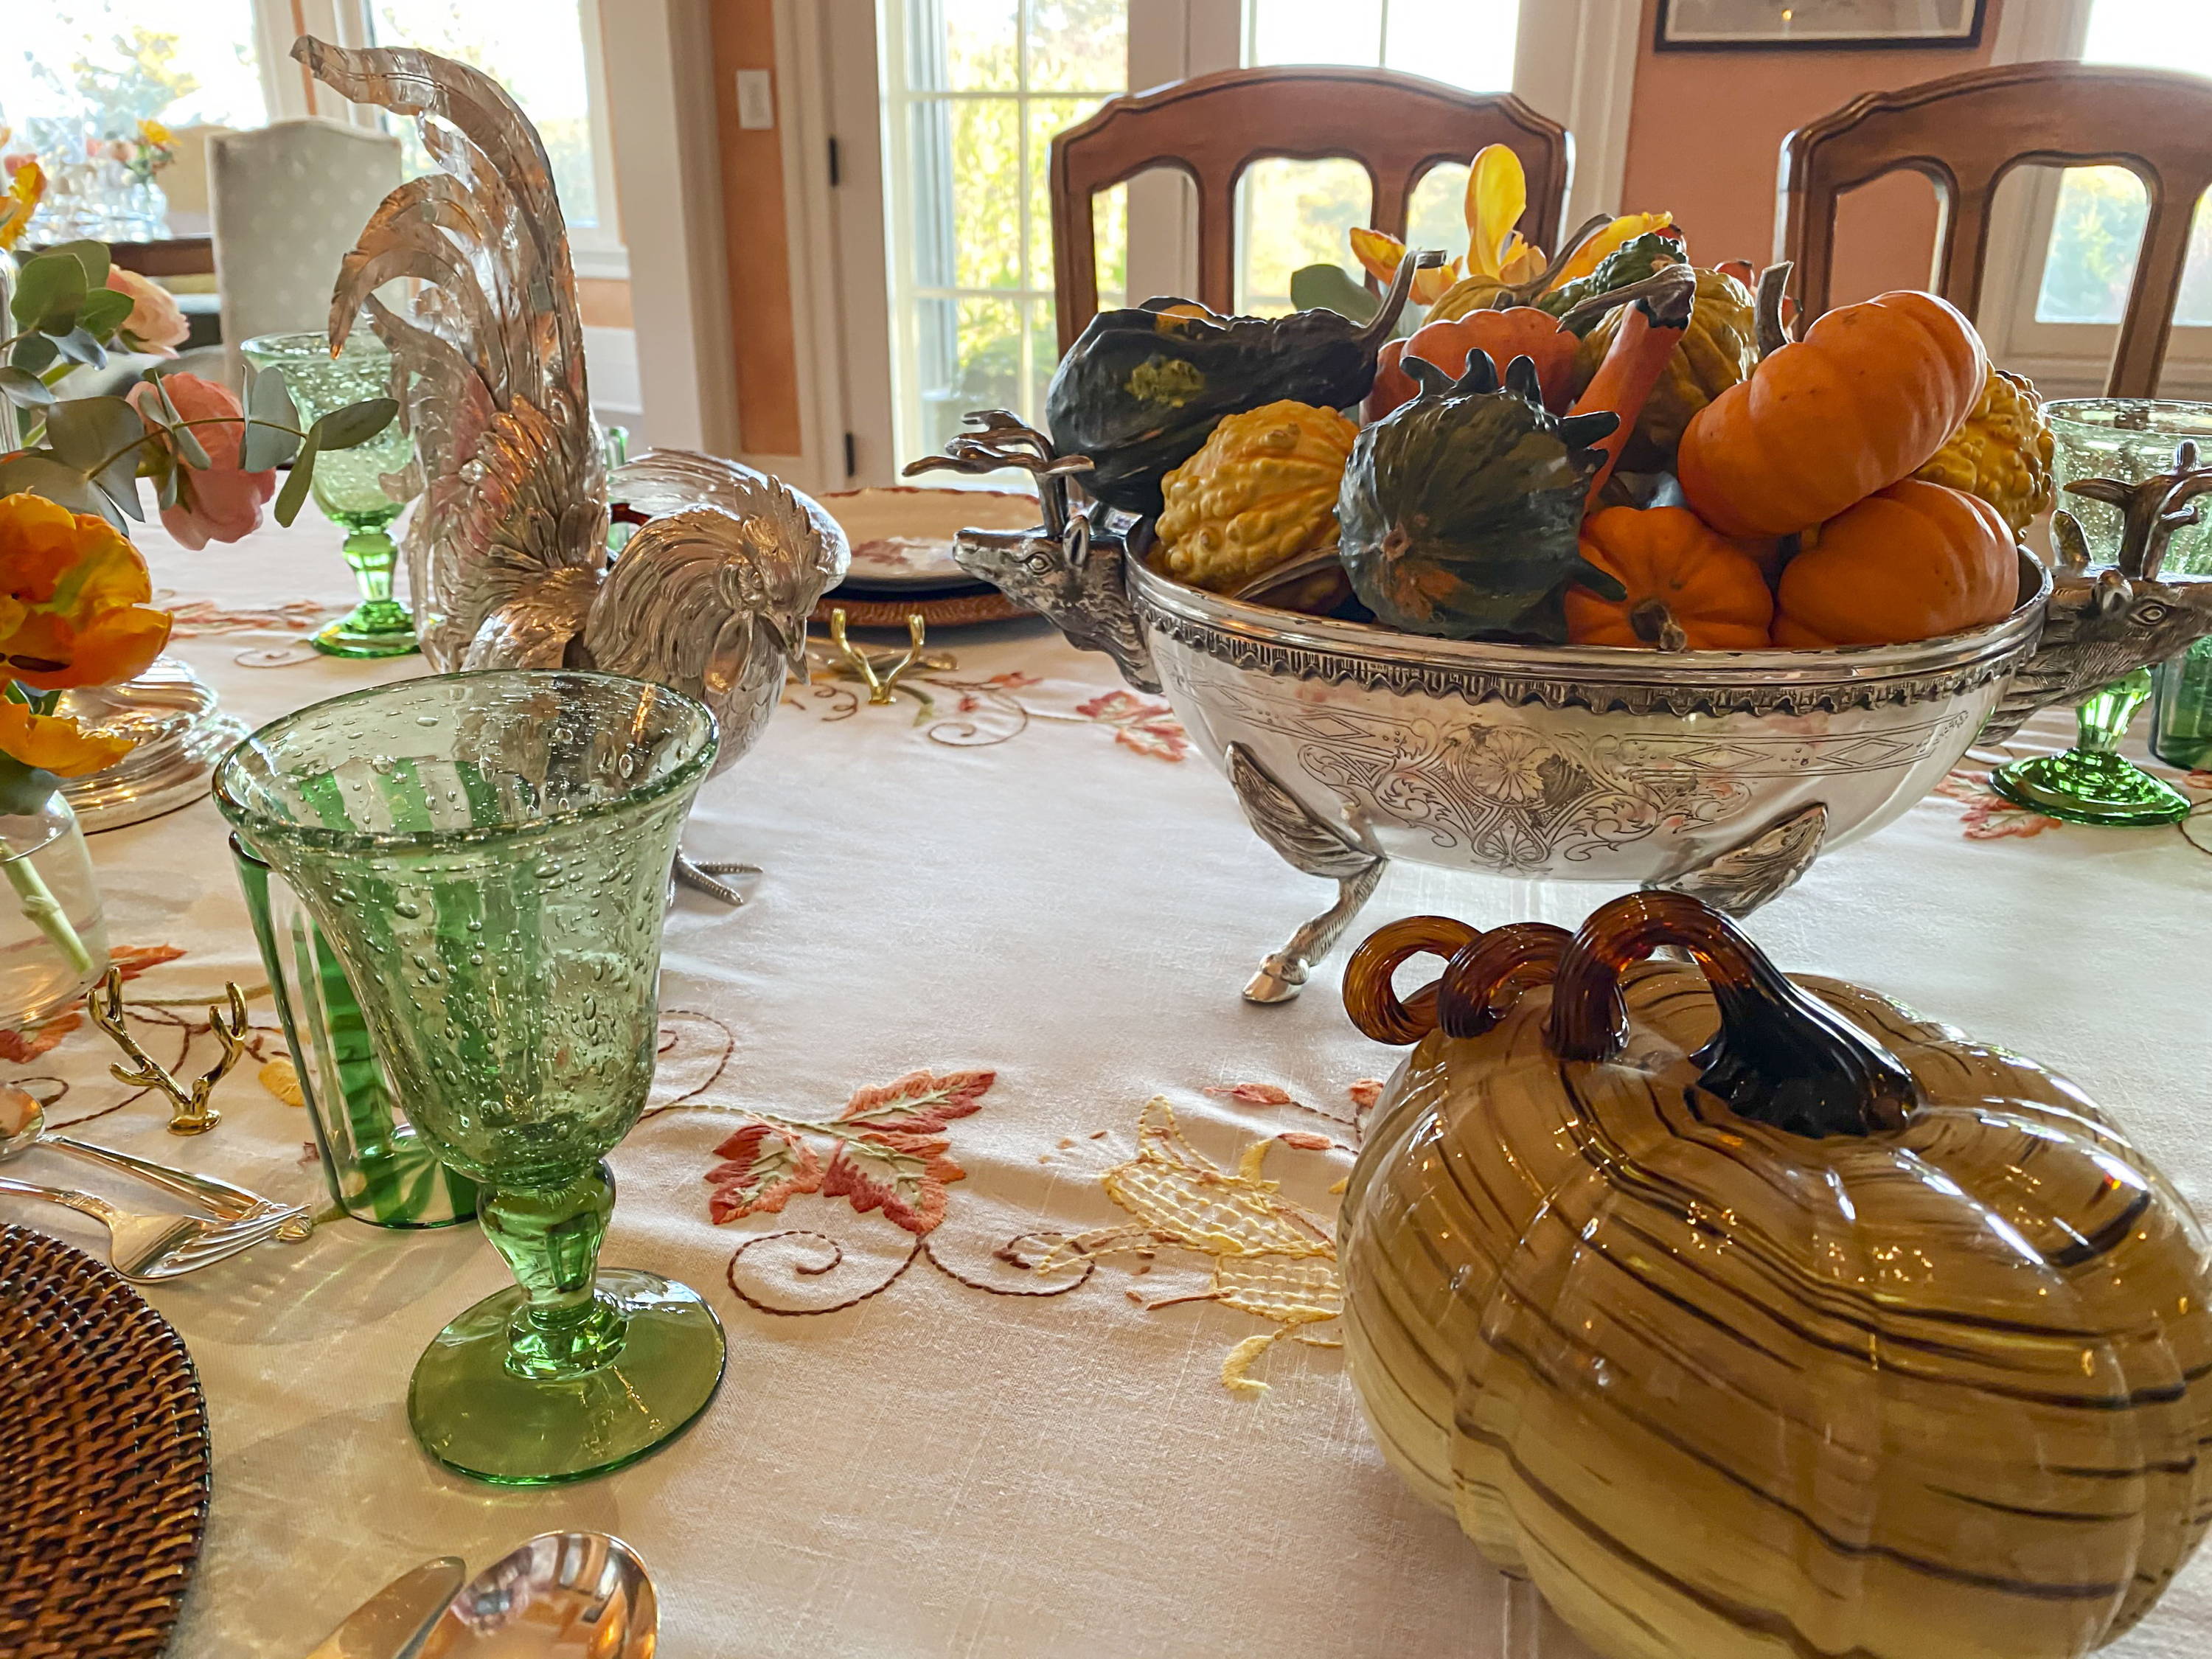 Thanksgiving table setting by Ala von Auersperg